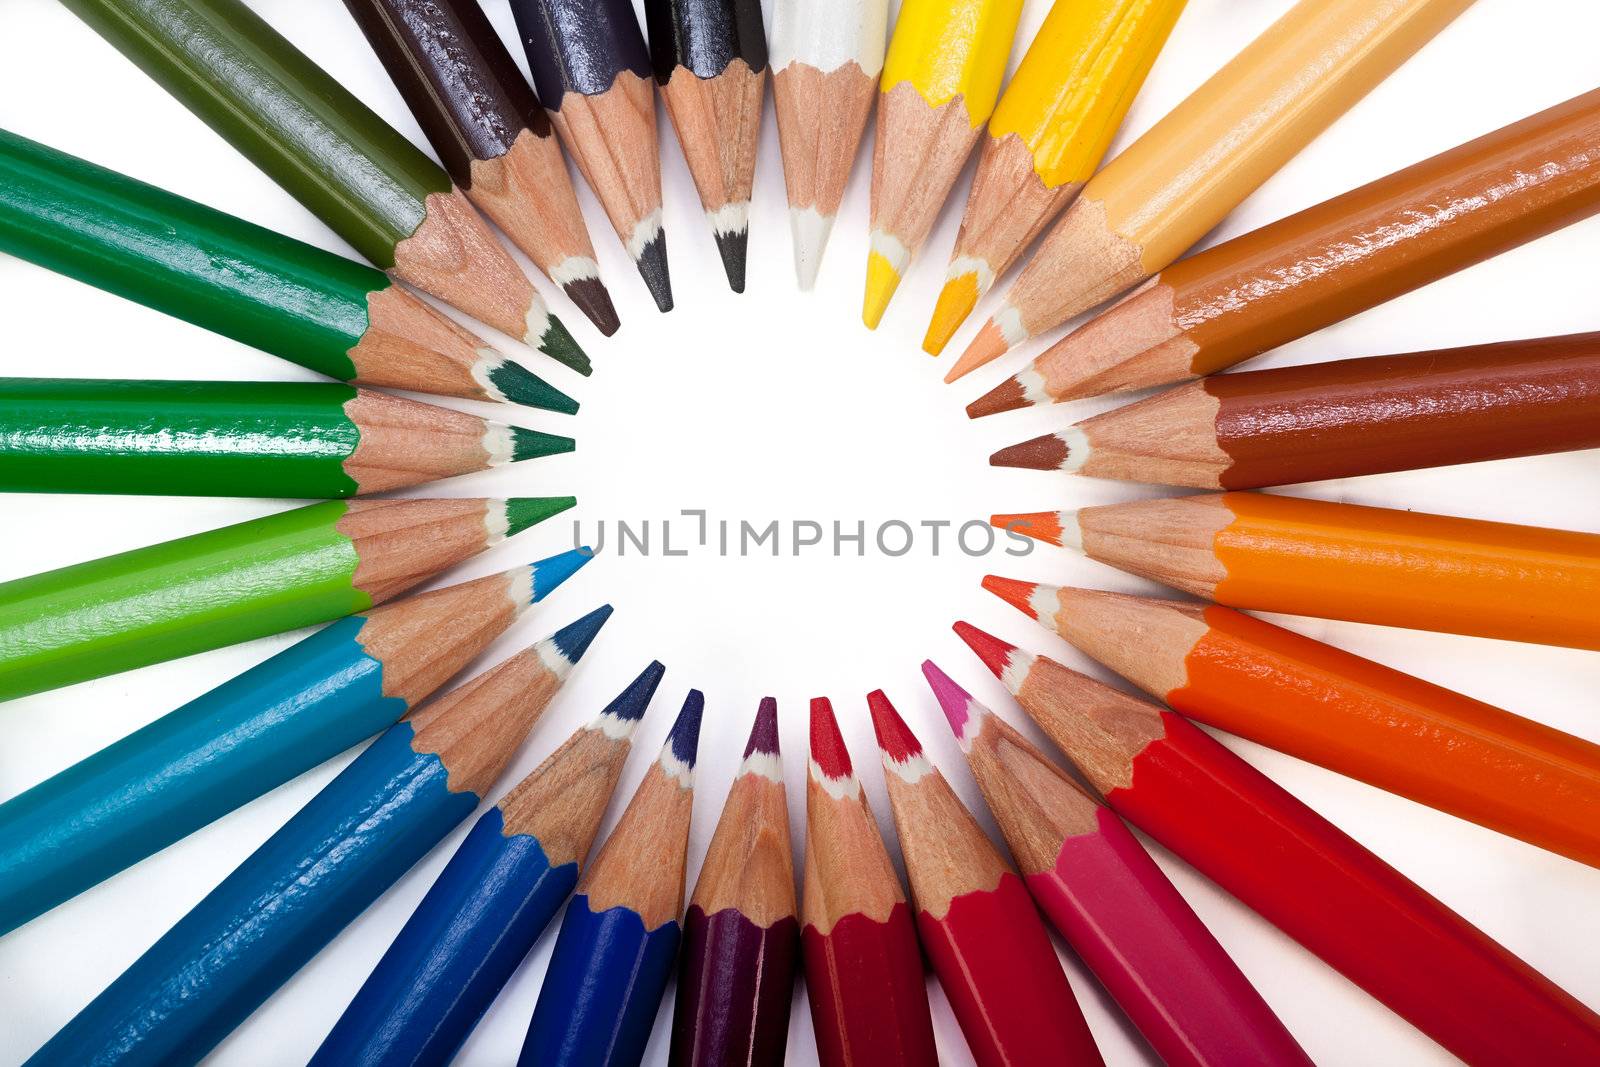 A vivid image with various colored pencils such as yellow, orange, red, pink and blue.